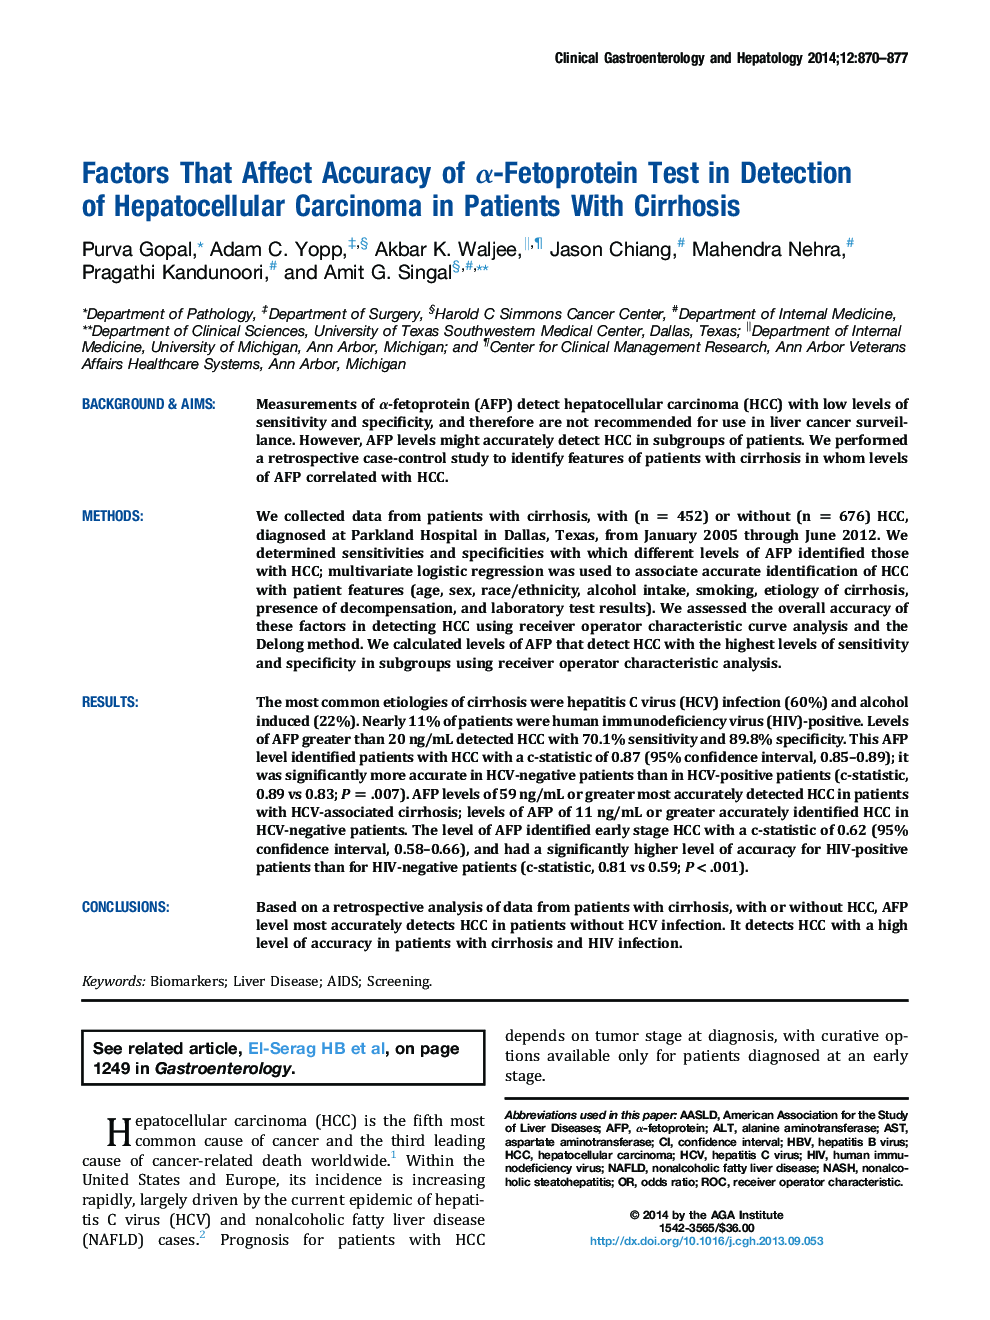 Factors That Affect Accuracy of Î±-Fetoprotein Test in Detection ofÂ Hepatocellular Carcinoma in Patients With Cirrhosis